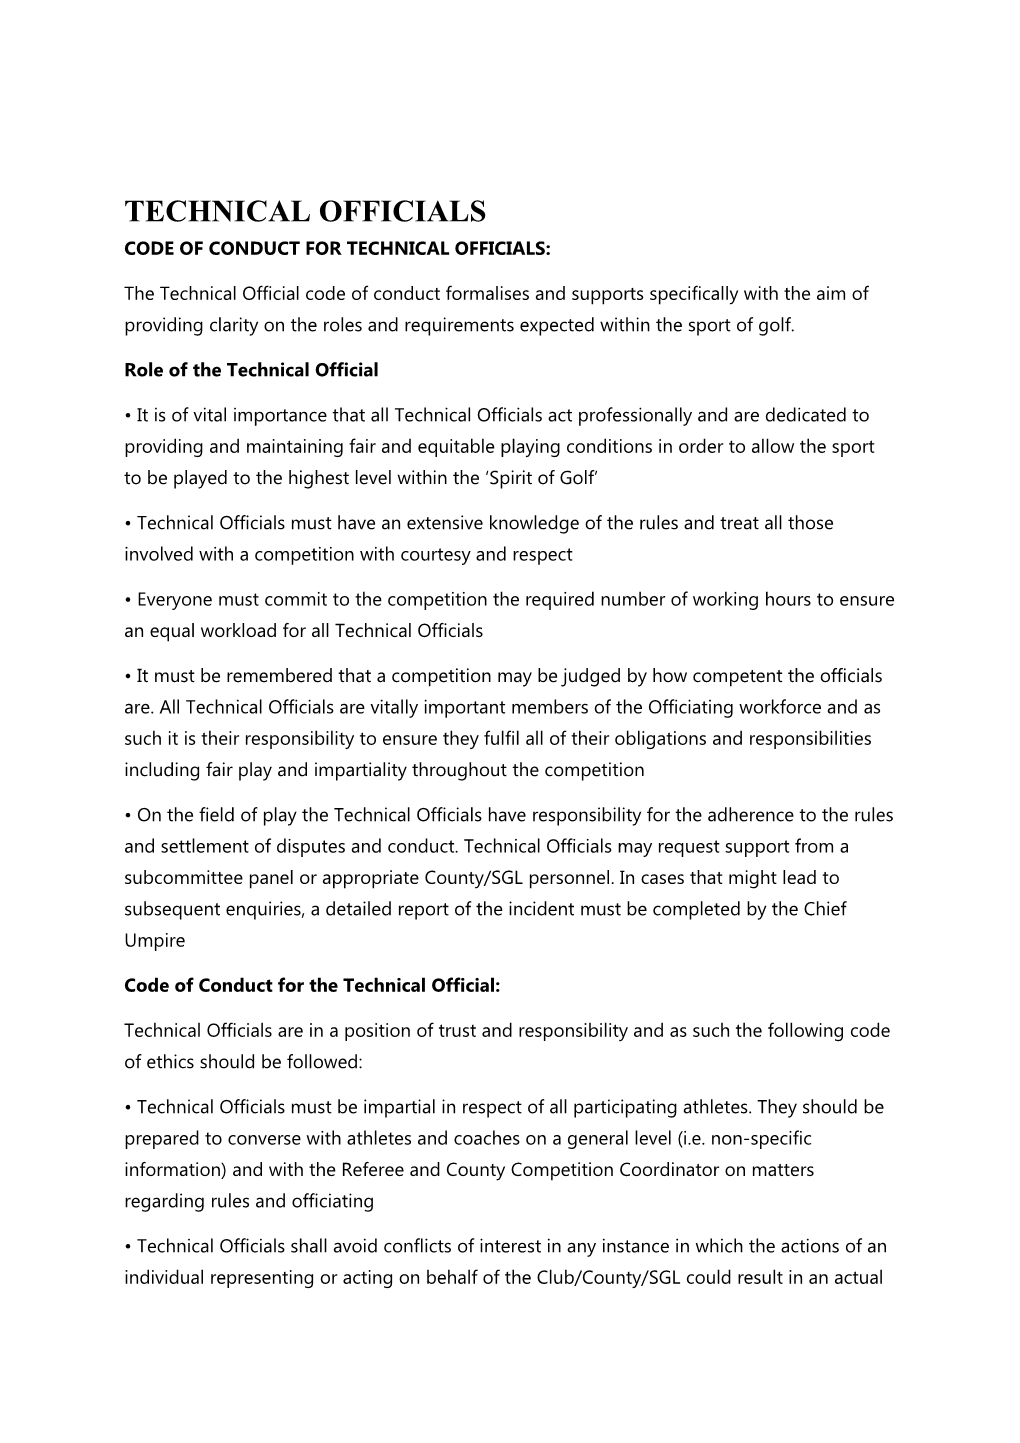 Code of Conduct for Technical Officials